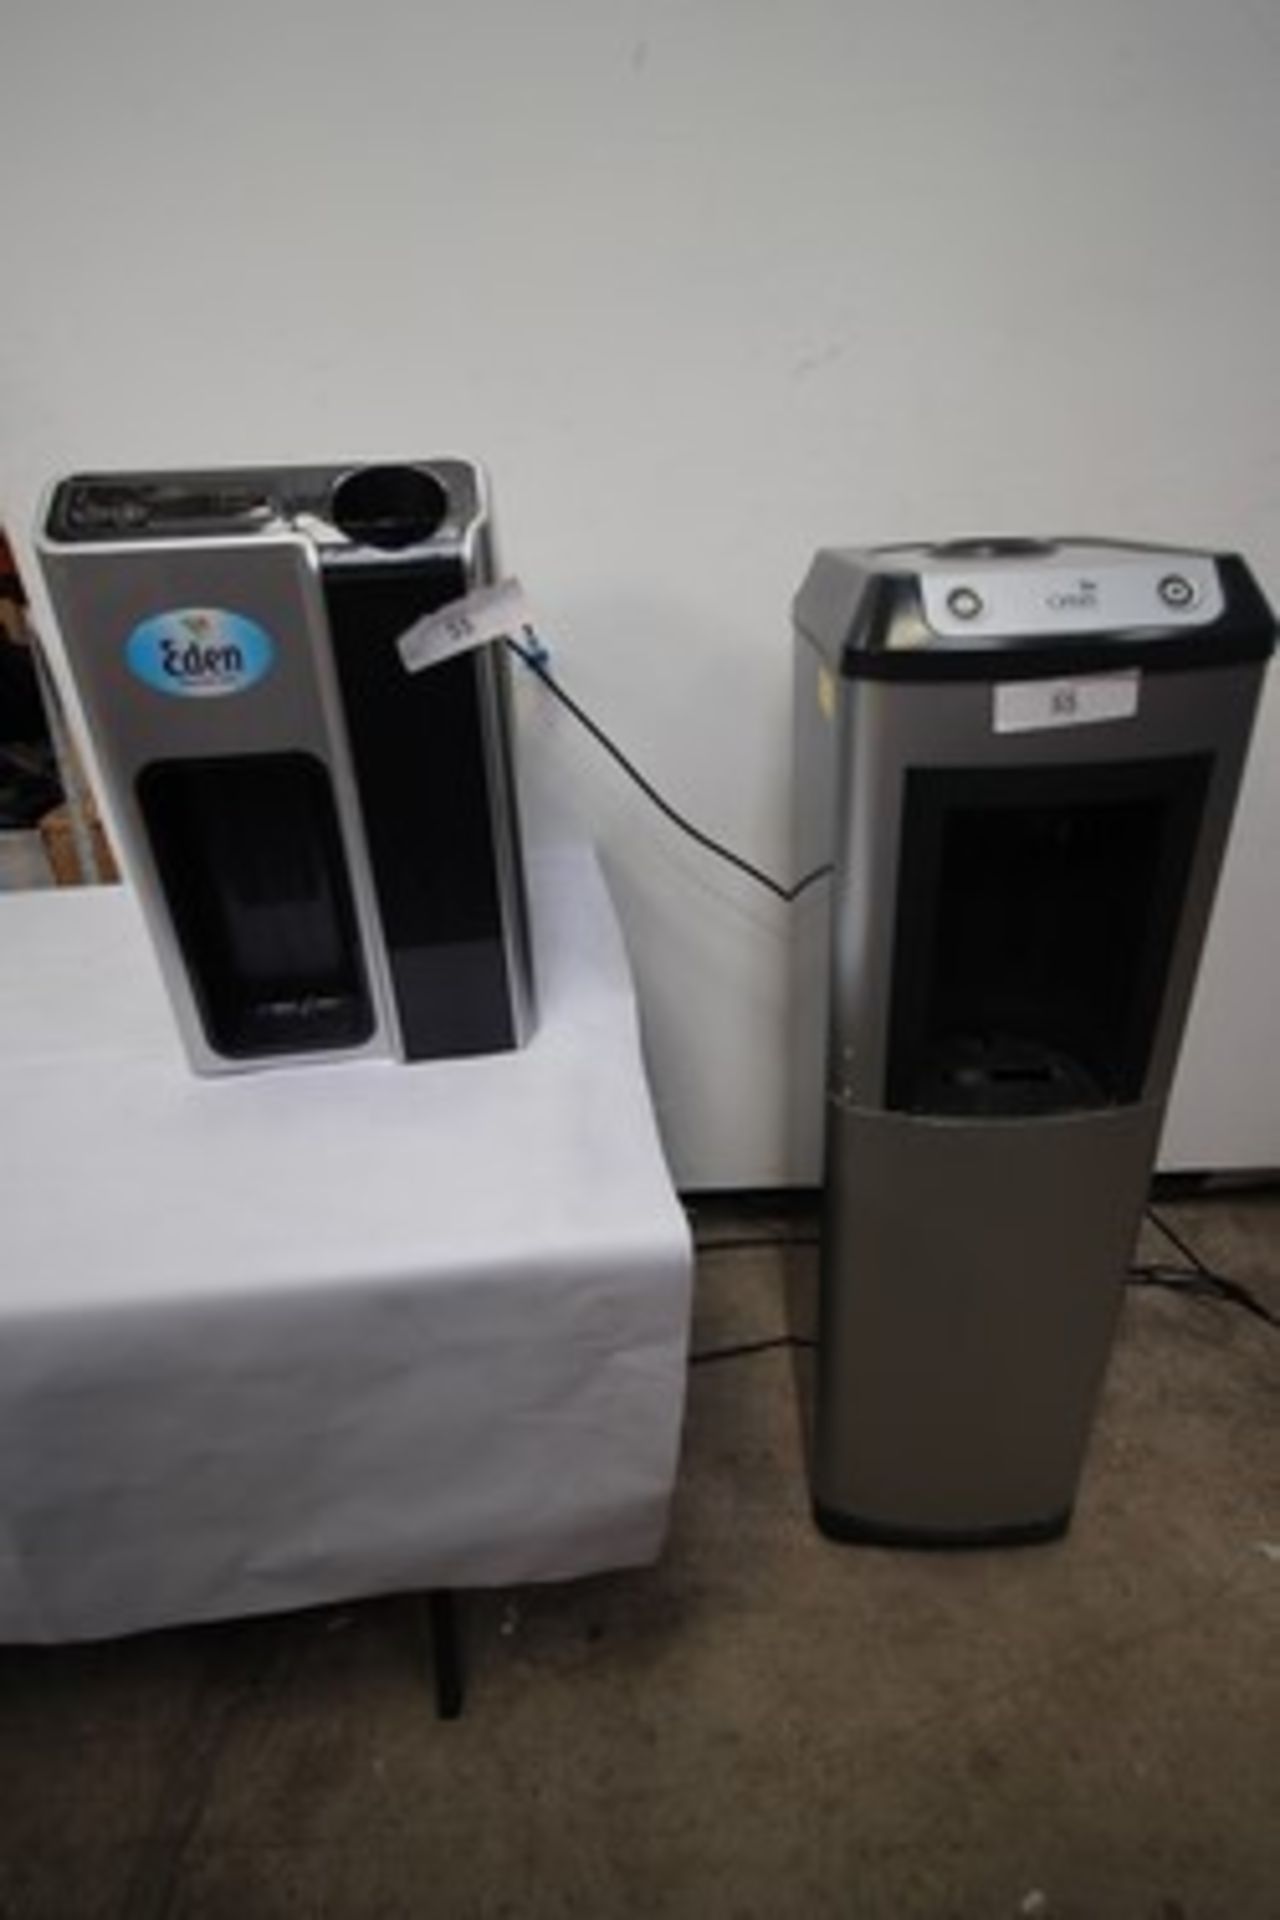 1 x Oasis water cooler, together with 1 x Borg Overstrom water cooler, both power on ok, not tested,